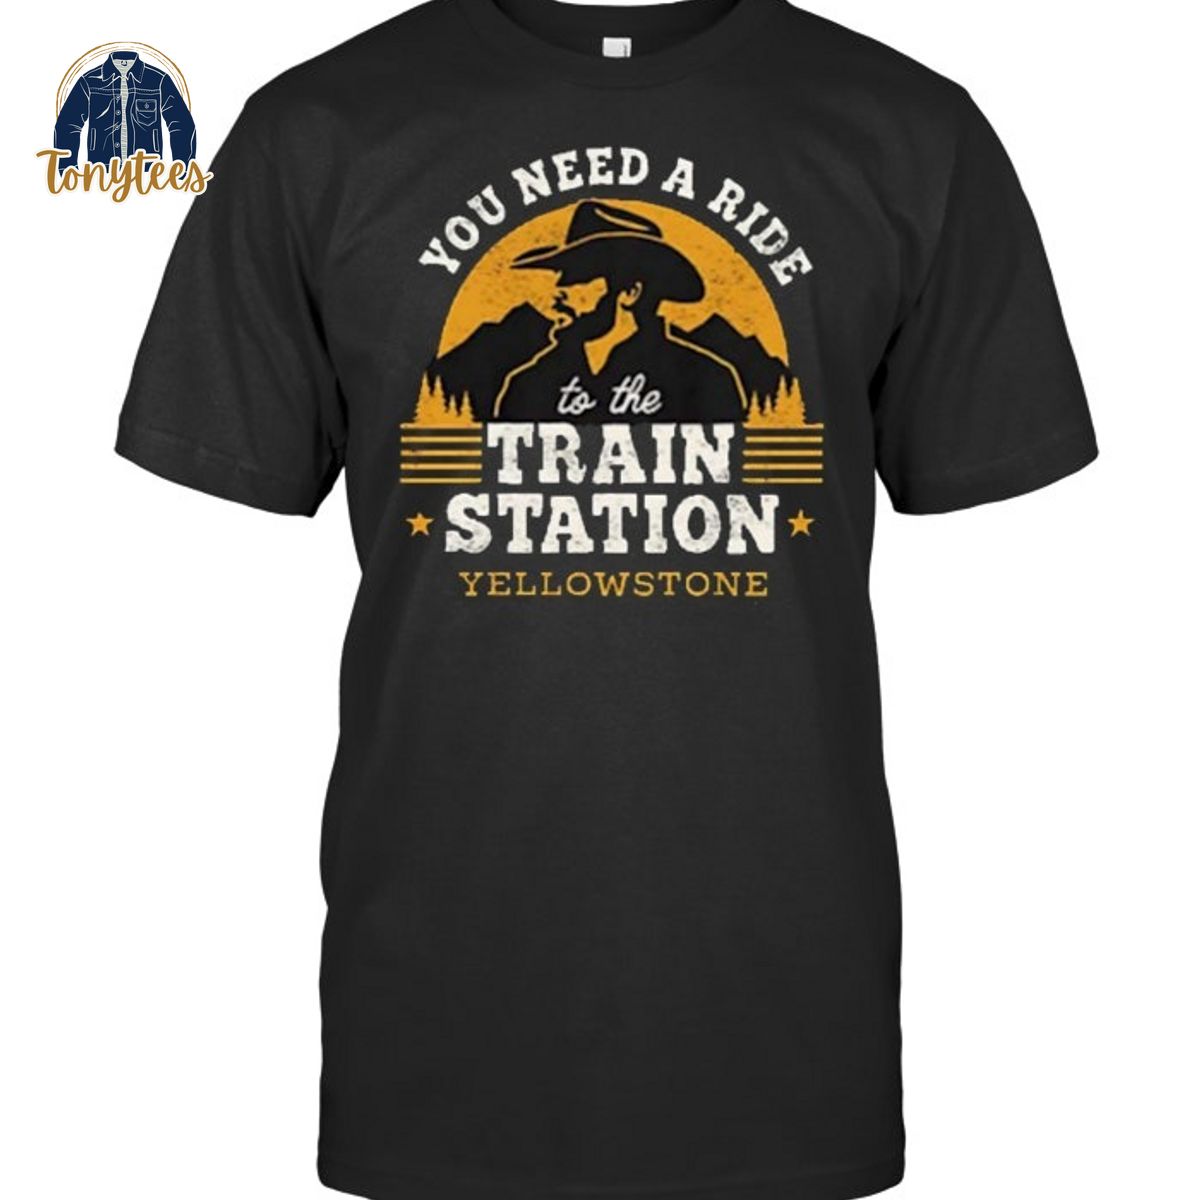 You need a ride to the train station Yellowstone shirt